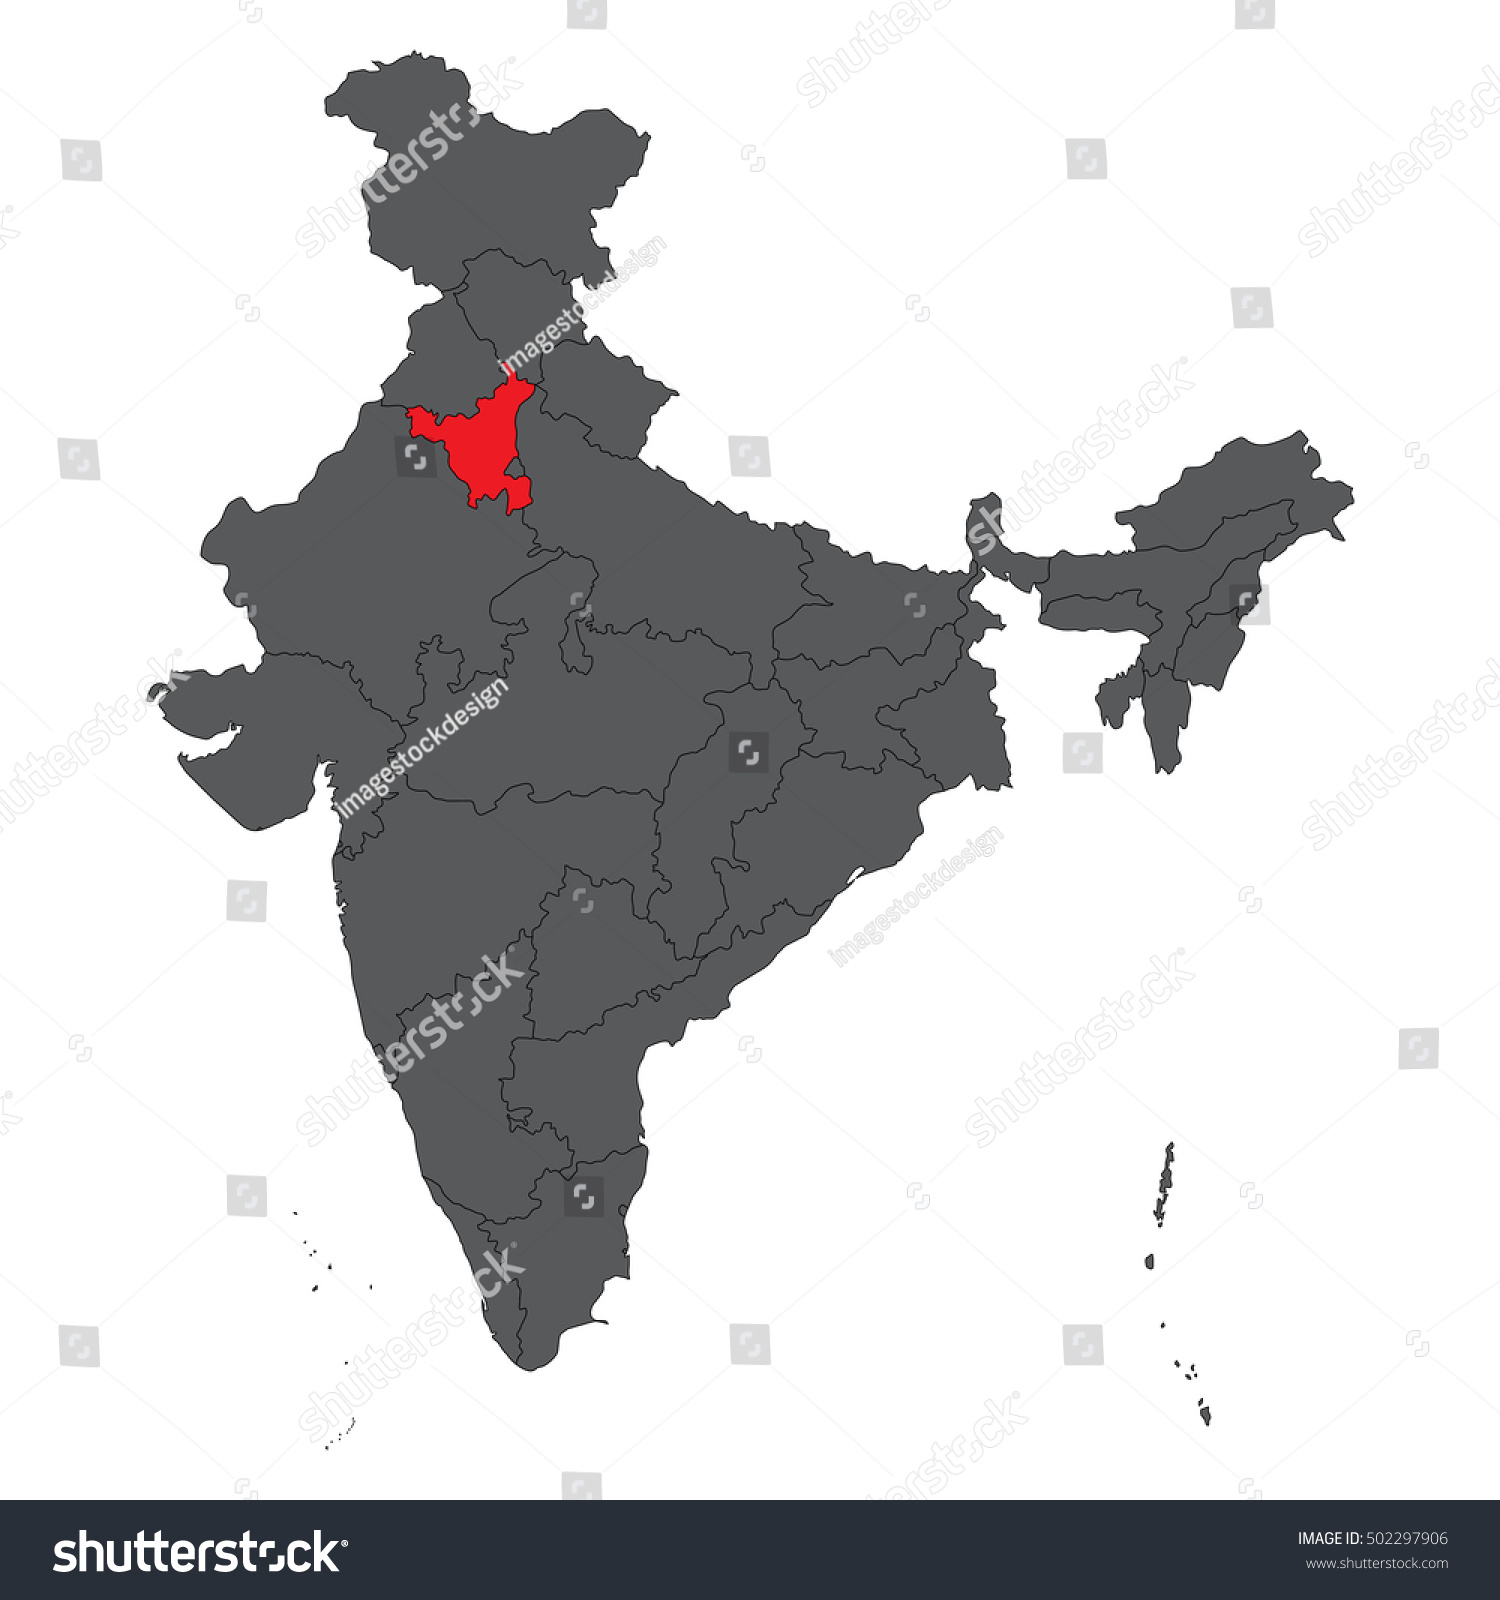 Haryana In India Map Haryana Red On Gray India Map Stock Vector (Royalty Free) 502297906 |  Shutterstock